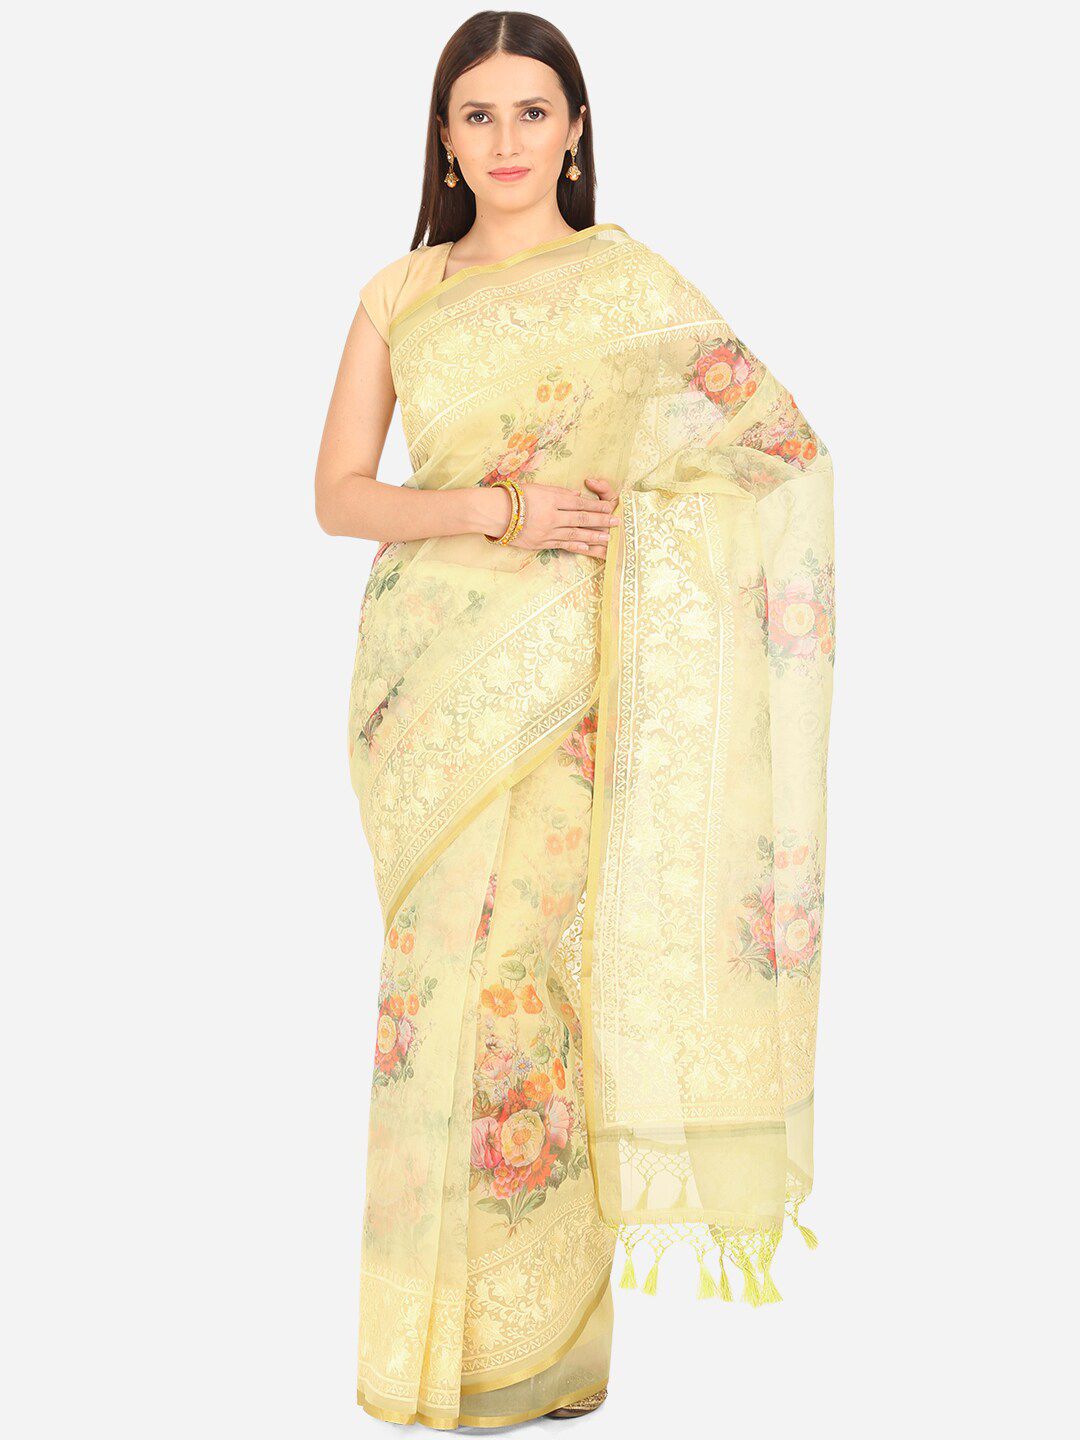 BOMBAY SELECTIONS Lime Green & Orange Floral Embroidered Organza Saree Price in India